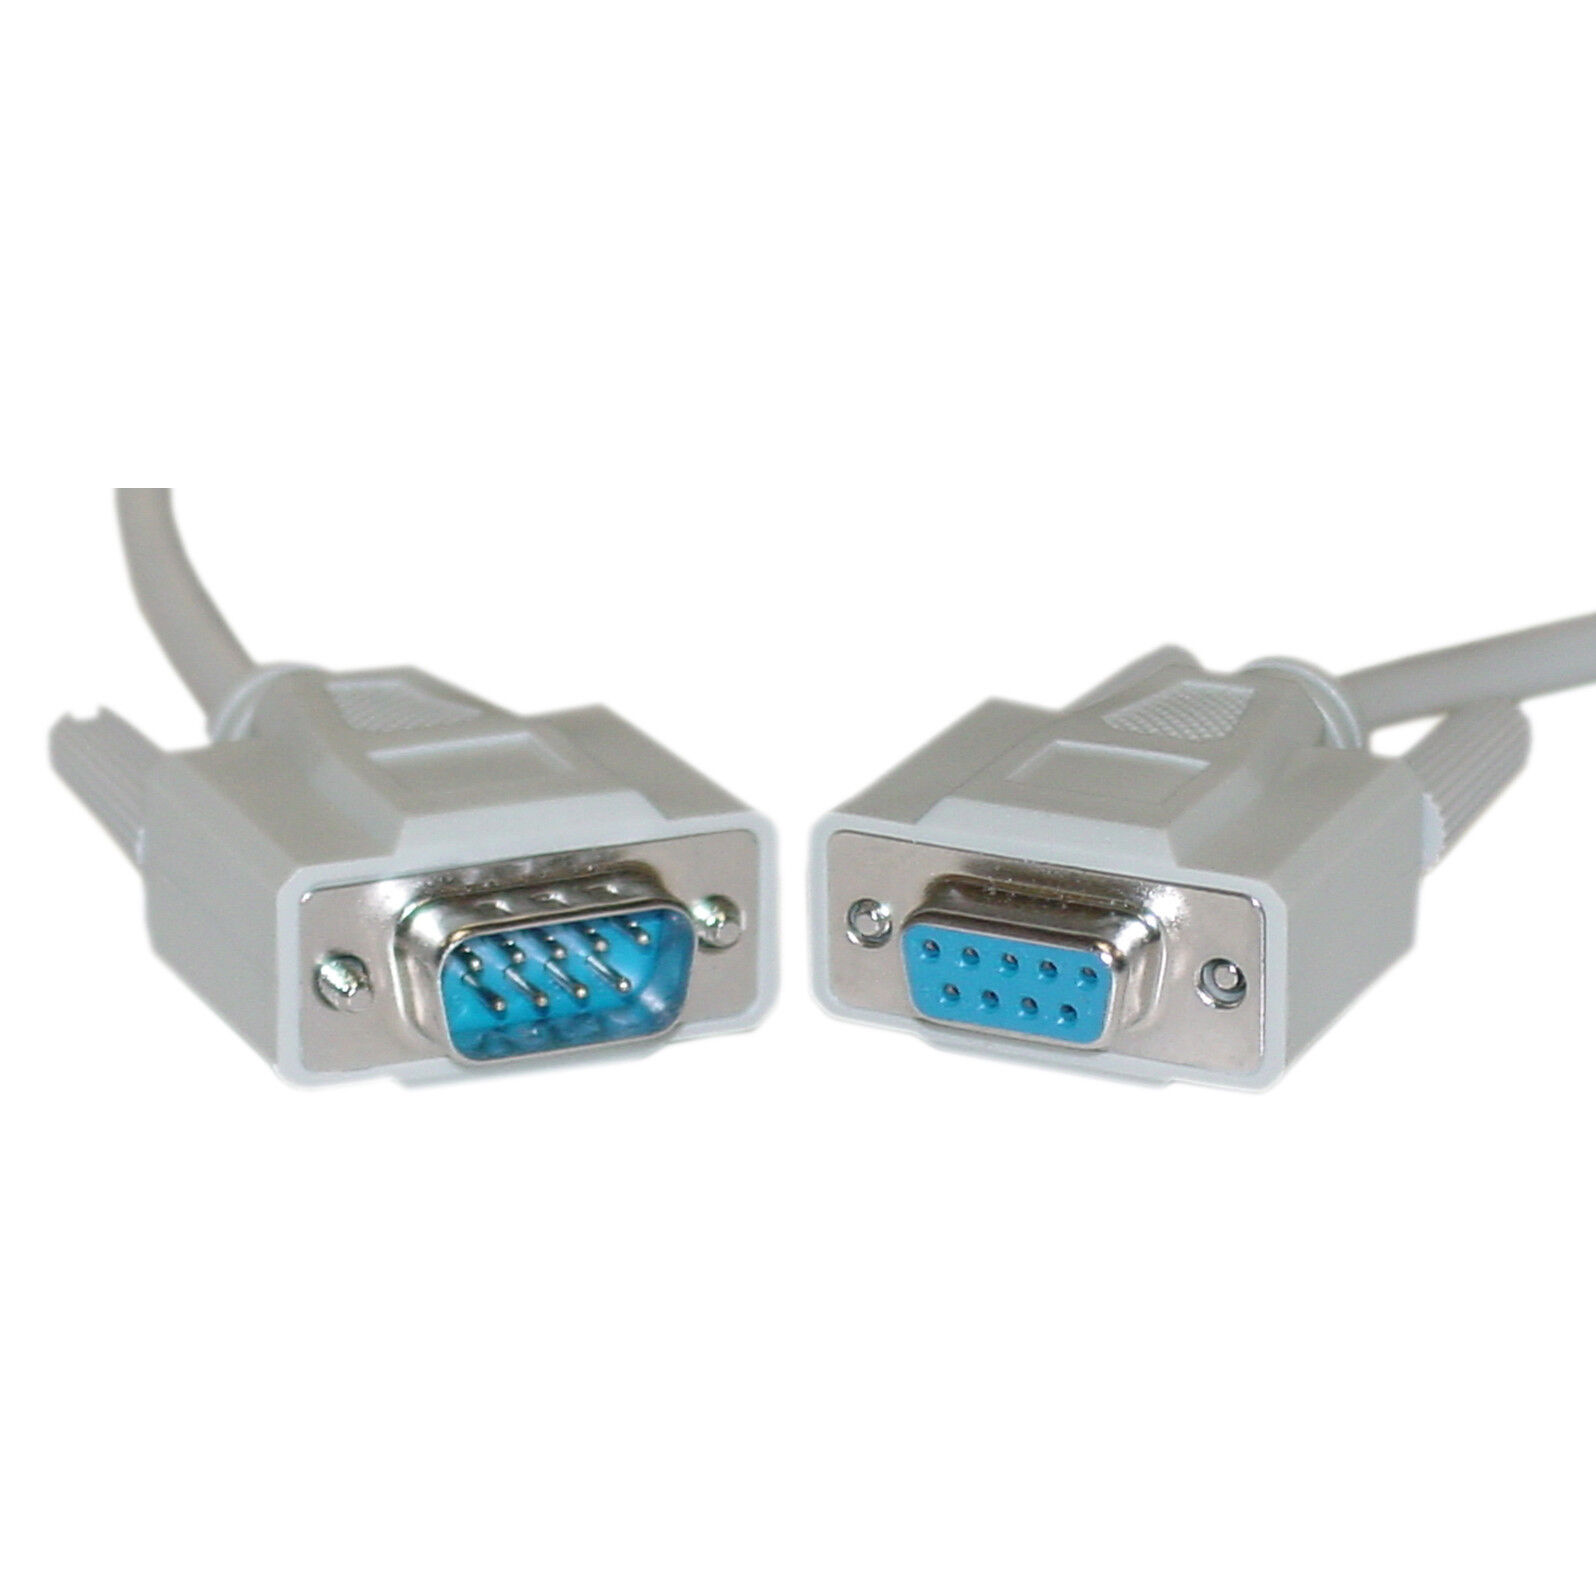 1ft Serial Extension Cable DB9 Male to DB9 Female RS-232 9 Conductor 10D1-03201